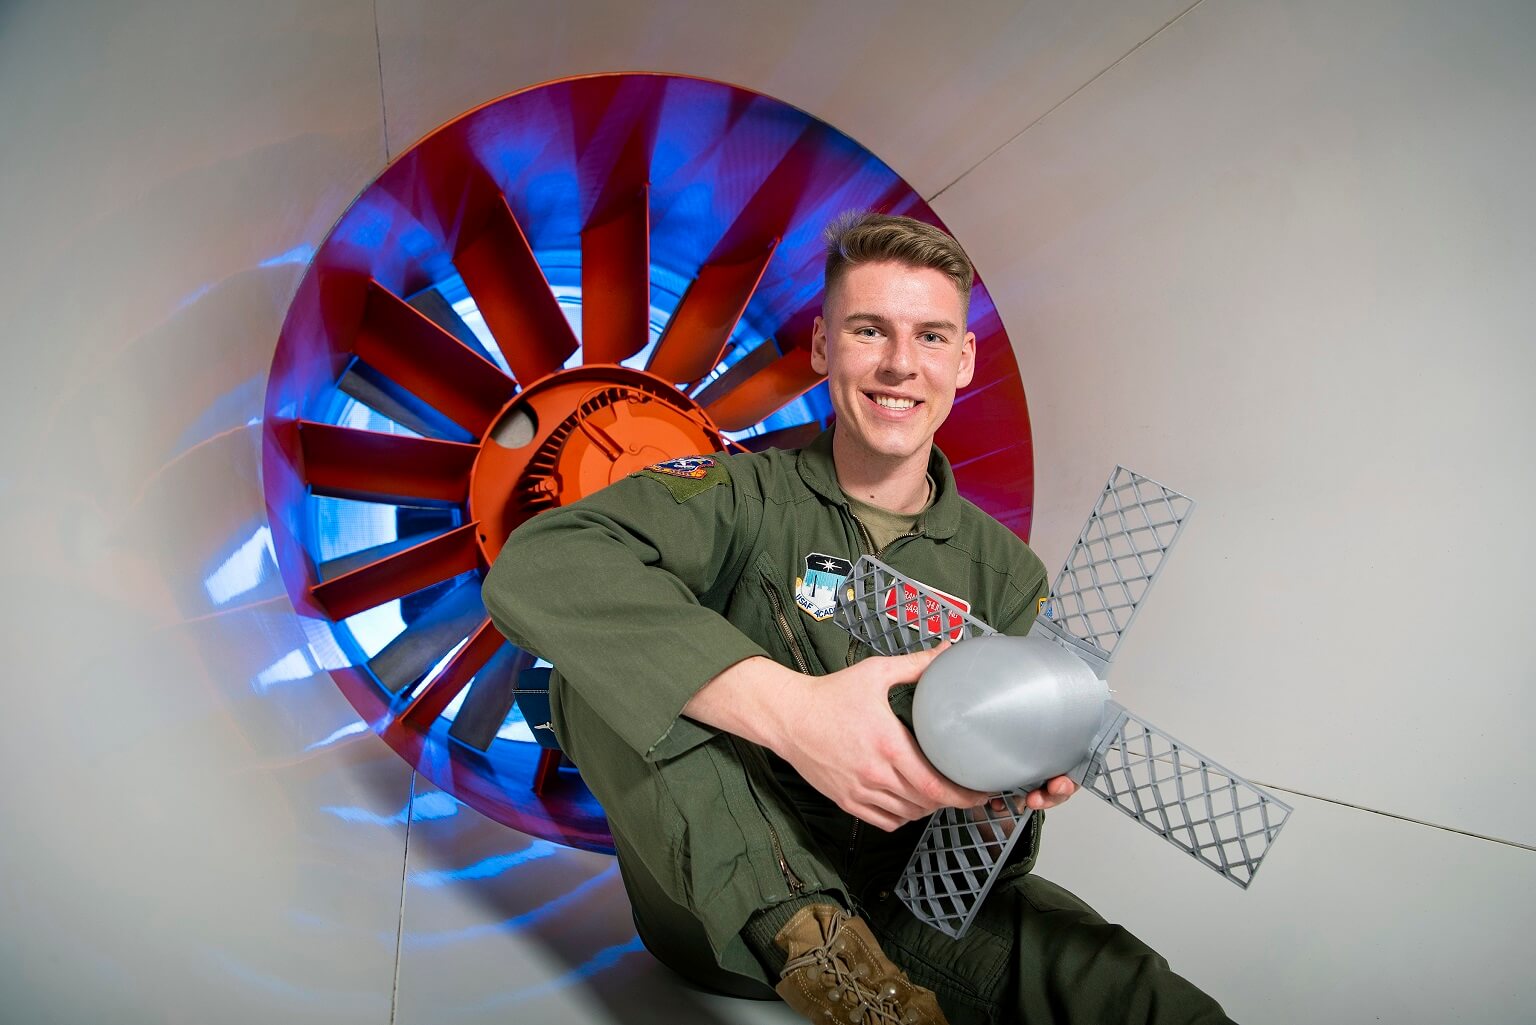 Cadet Schlichting is the inventor of the aerial towing rehookup